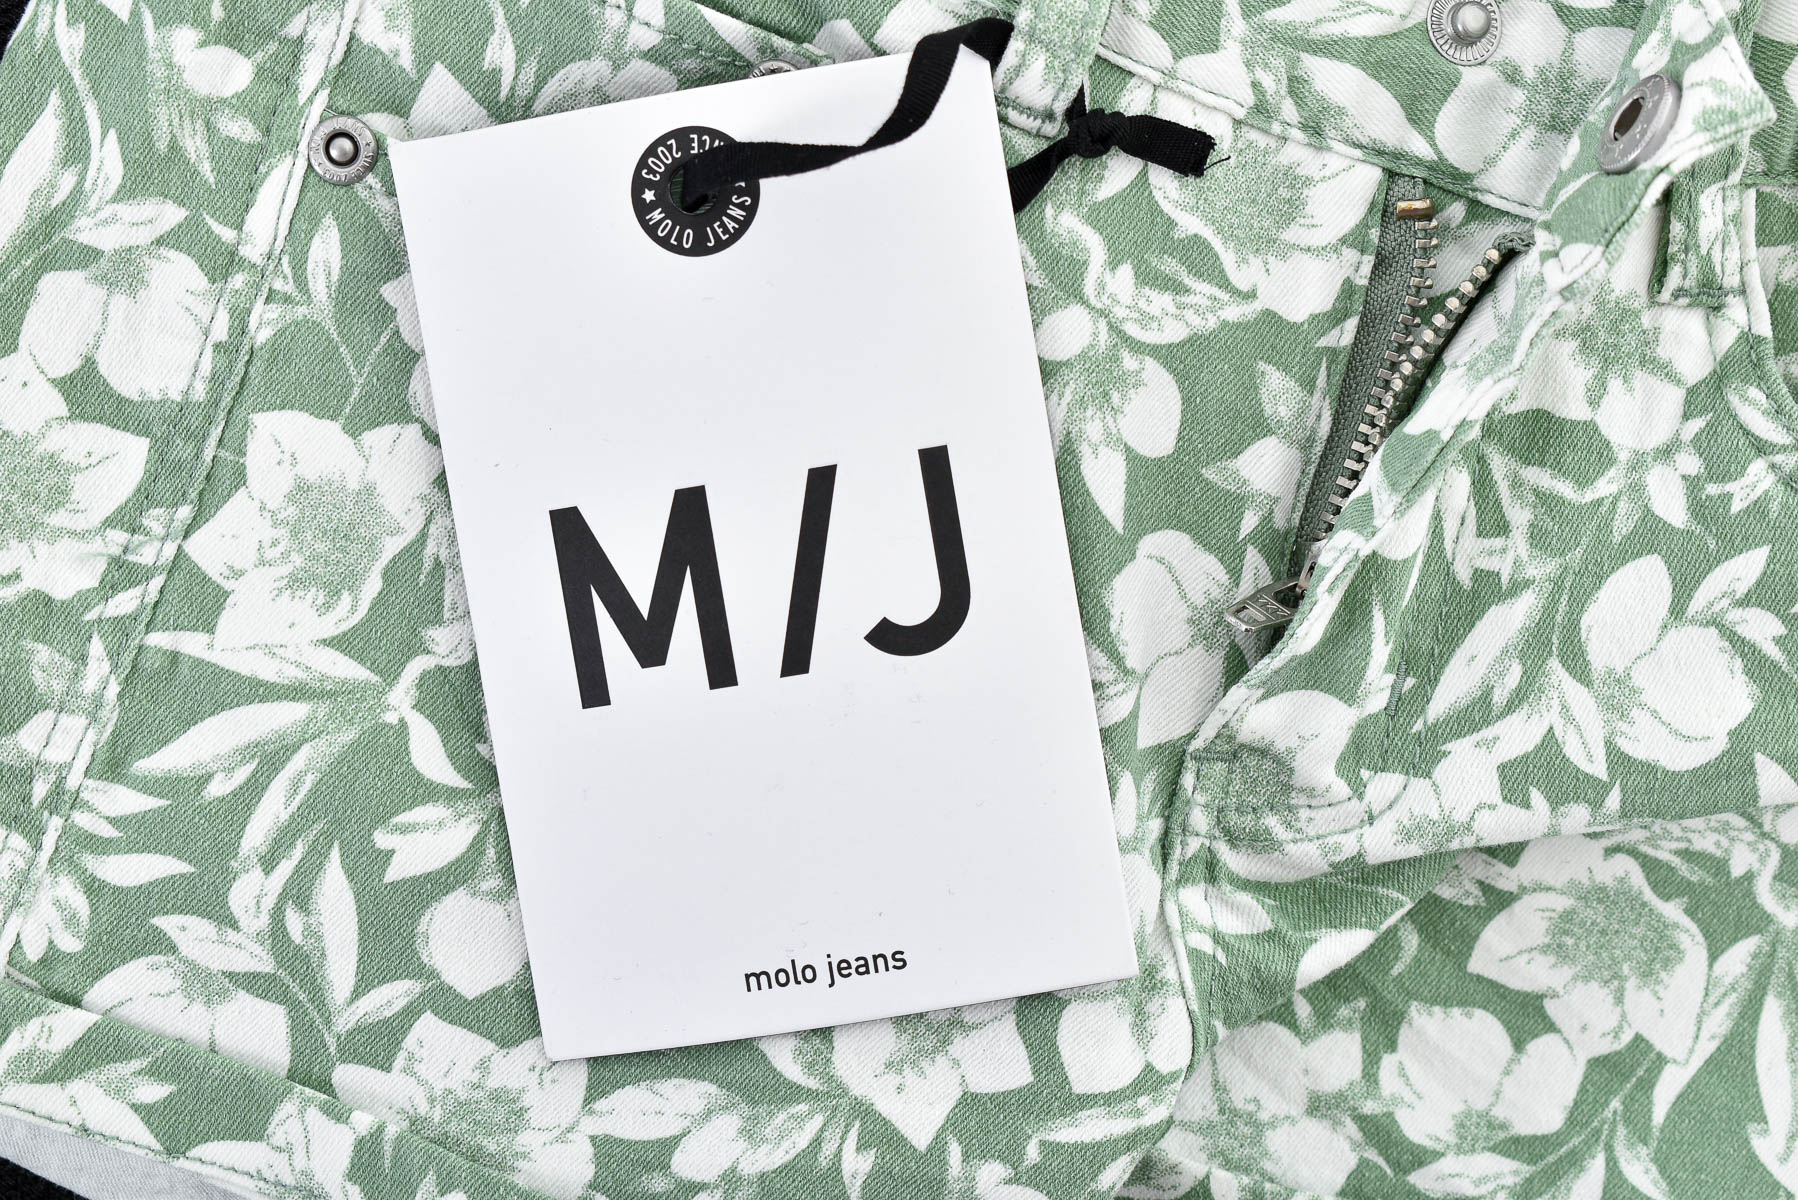 Shorts for girls - M/J Molo Jeans - 2